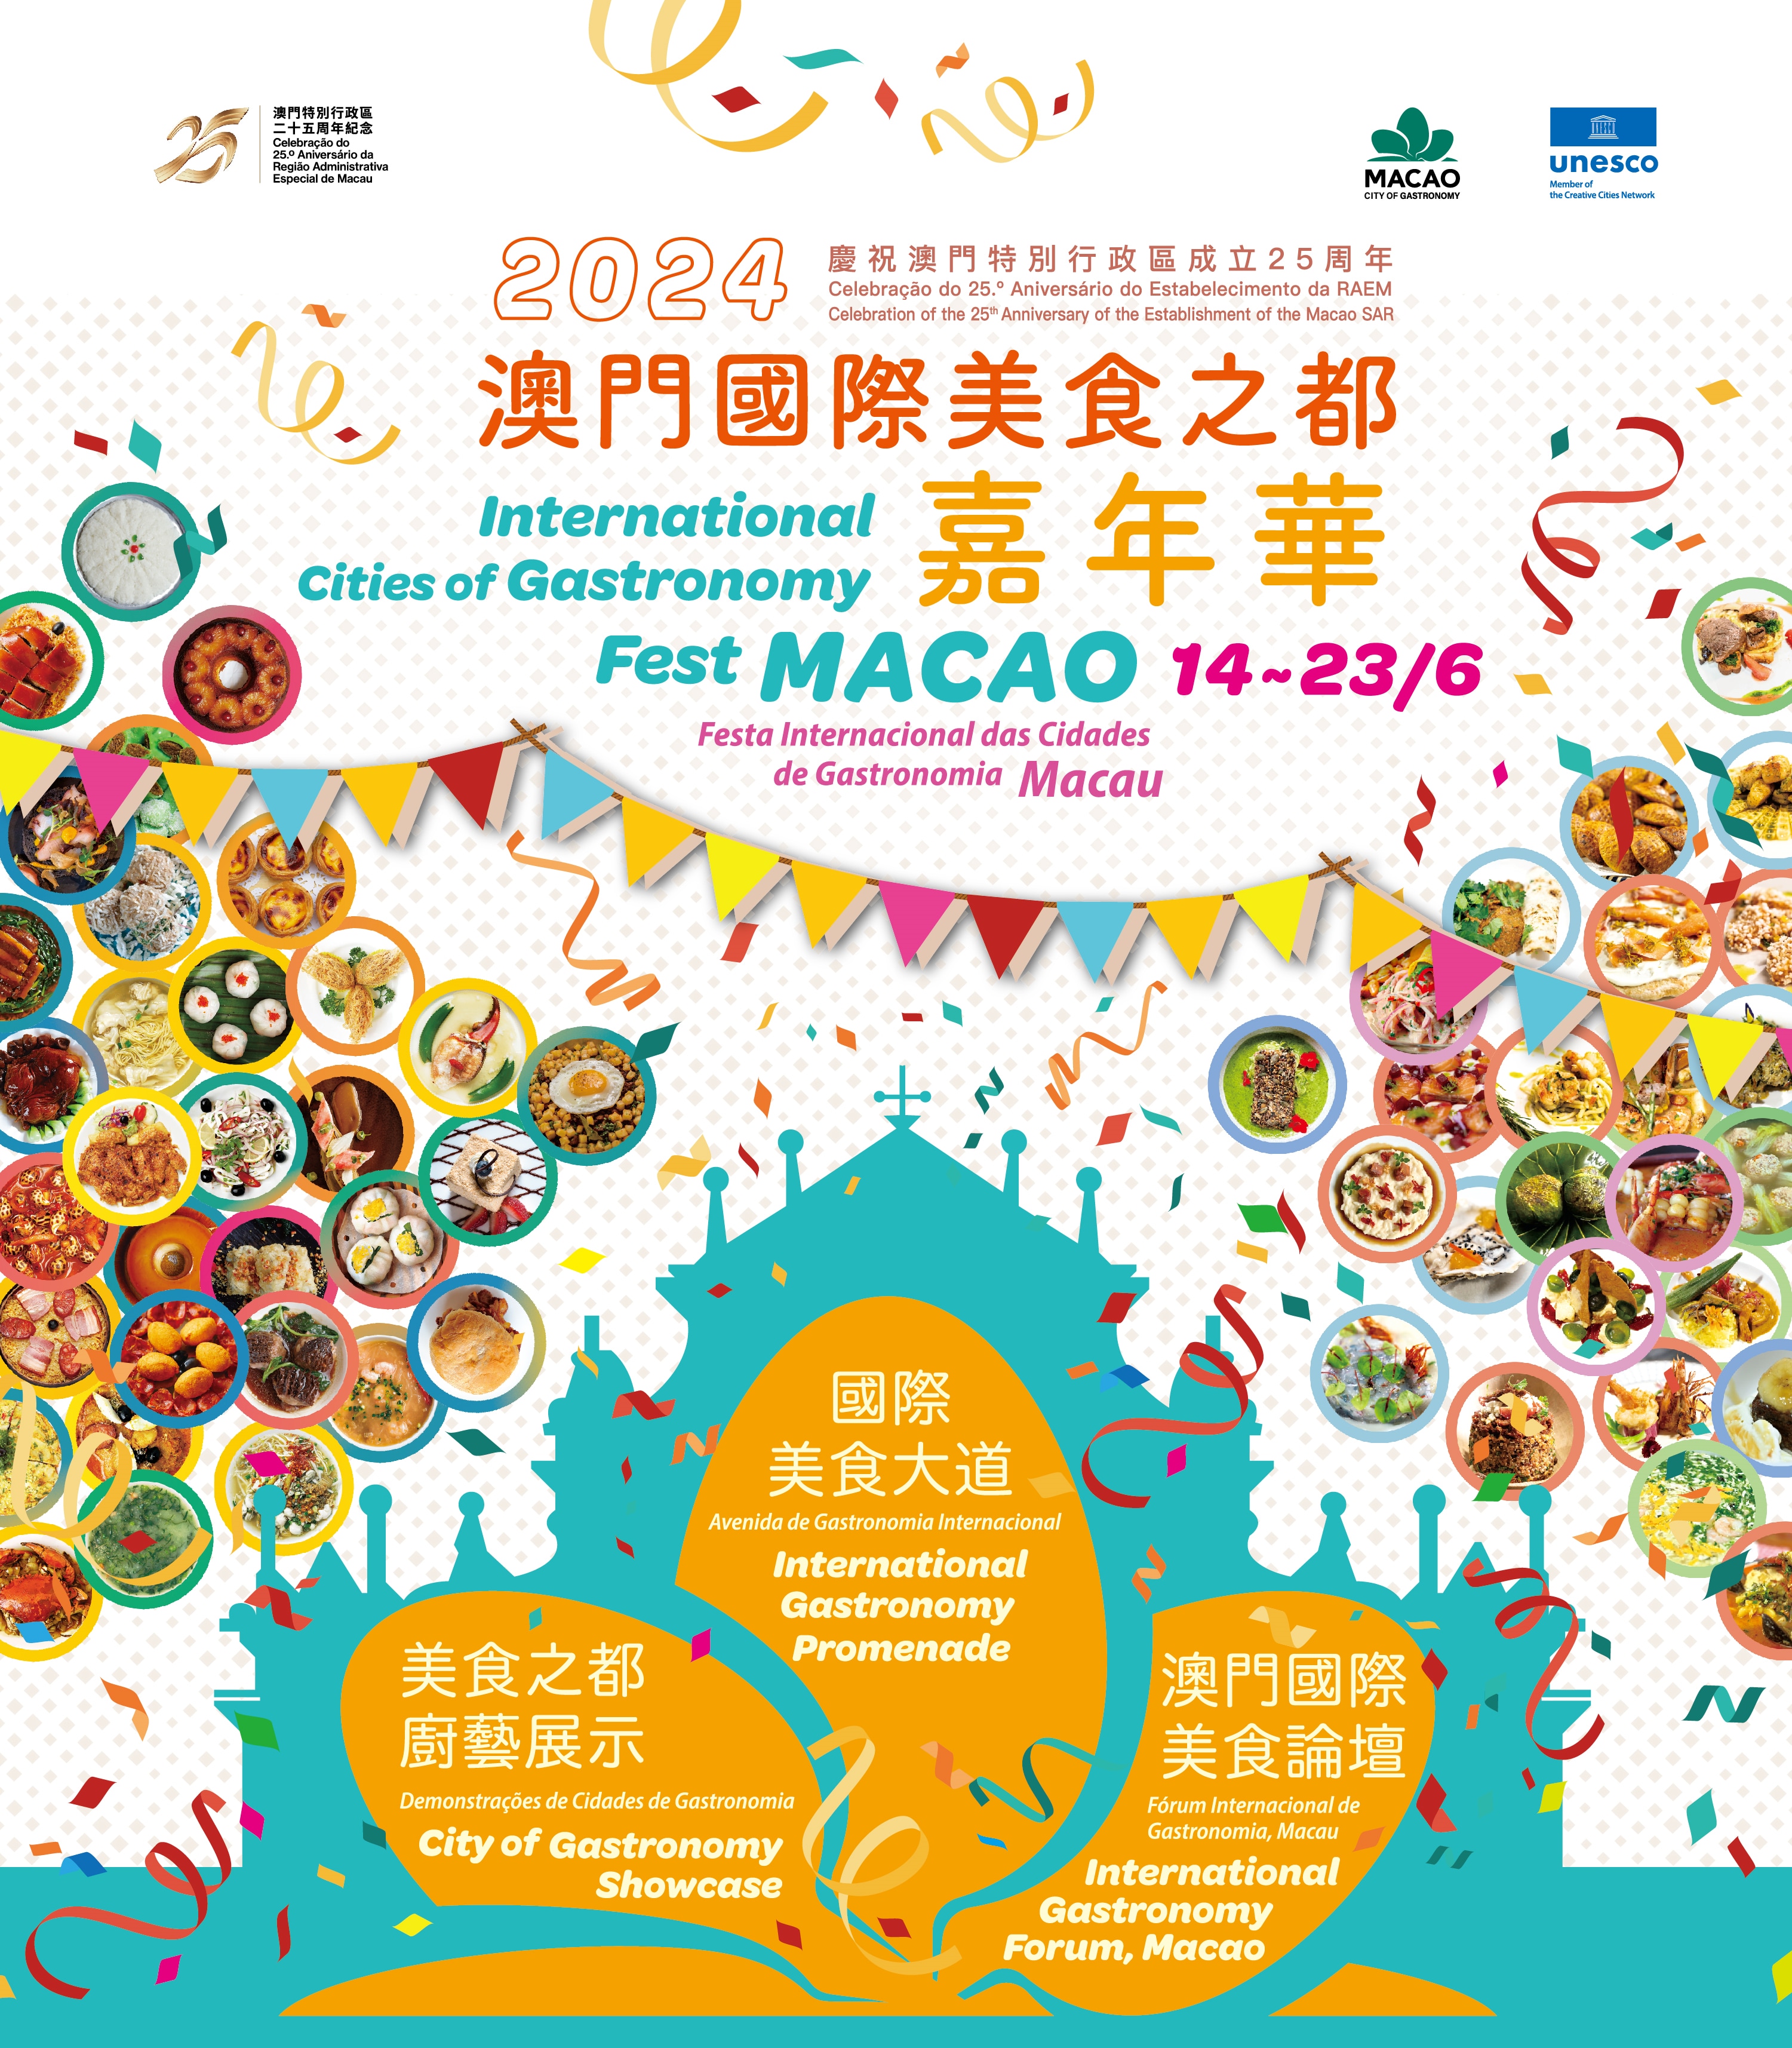 Celebration of the 25th Anniversary of the Establishment of the Macao SAR – International Cities of Gastronomy Fest, Macao